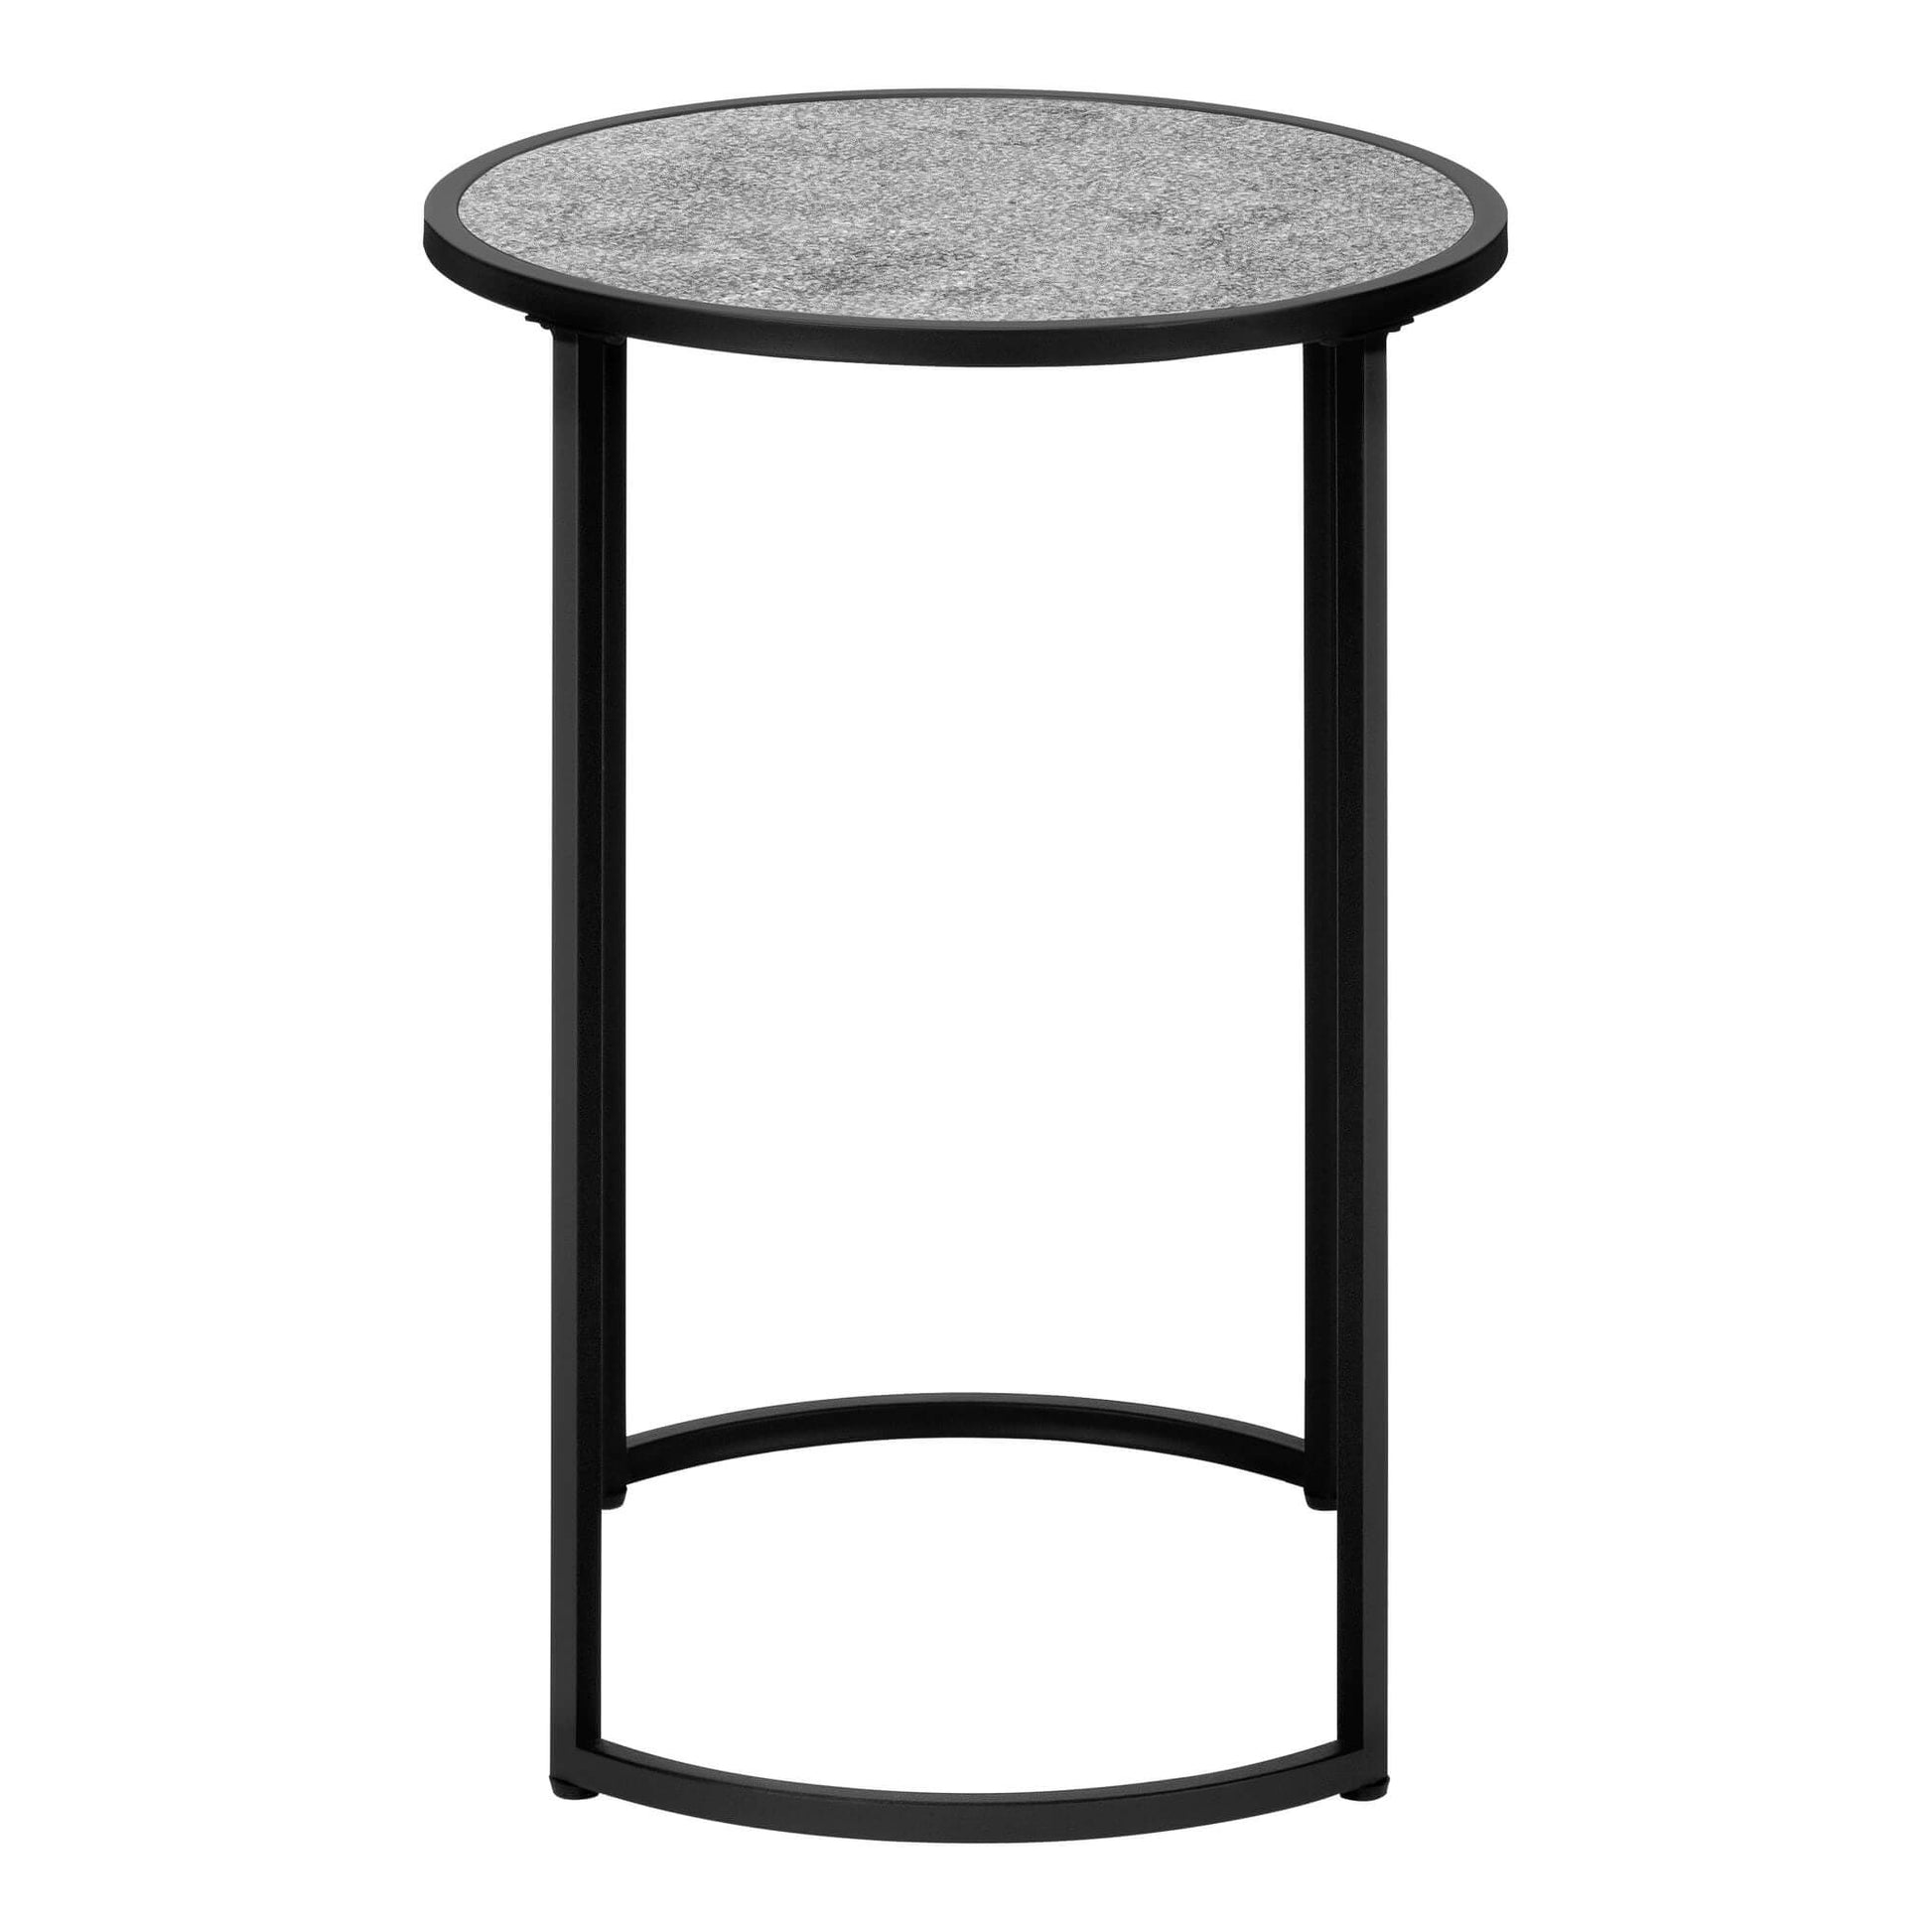 Monarch Specialties - 18.25"Dia/24"H Modern Laminate Bedroom Accent Table with Metal Frame - I 2205